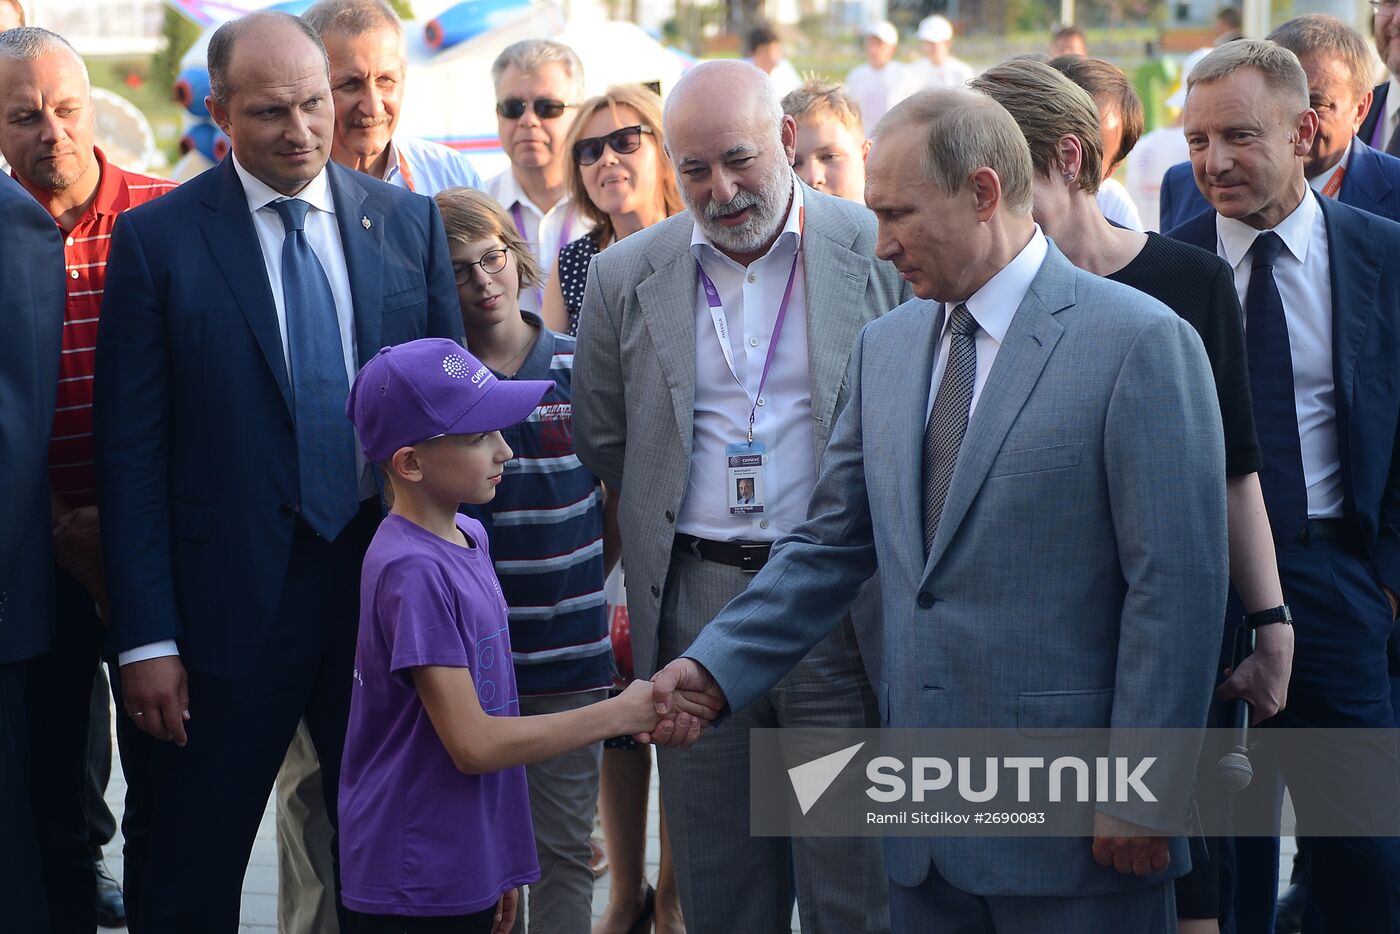 President Vladimir Putin attends celebrations of Knowledge Day in Sirius Center for Talented Children in Sochi